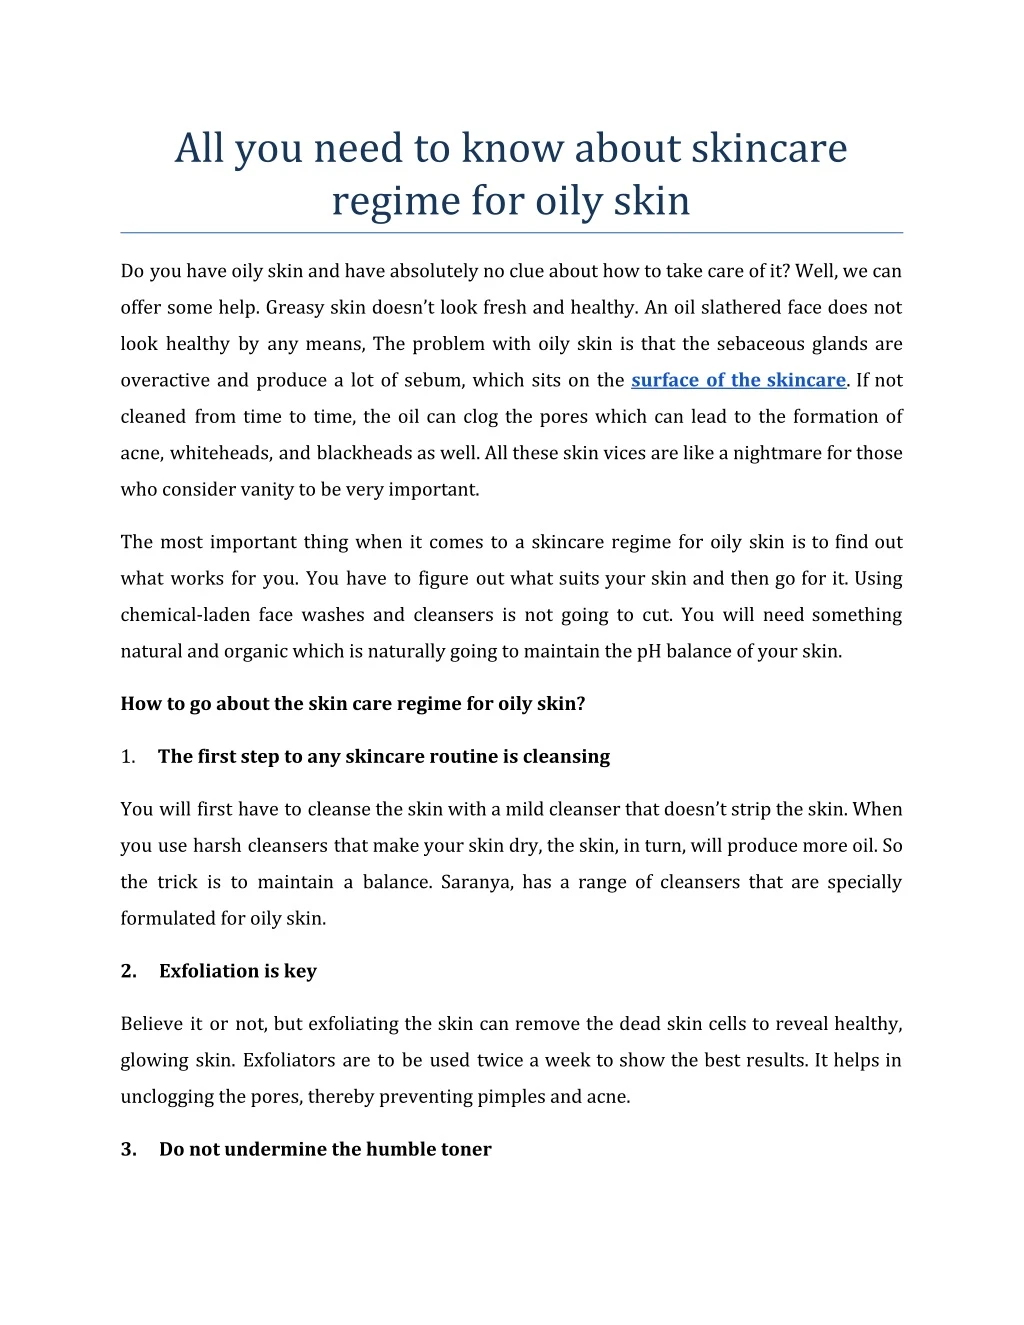 all you need to know about skincare regime